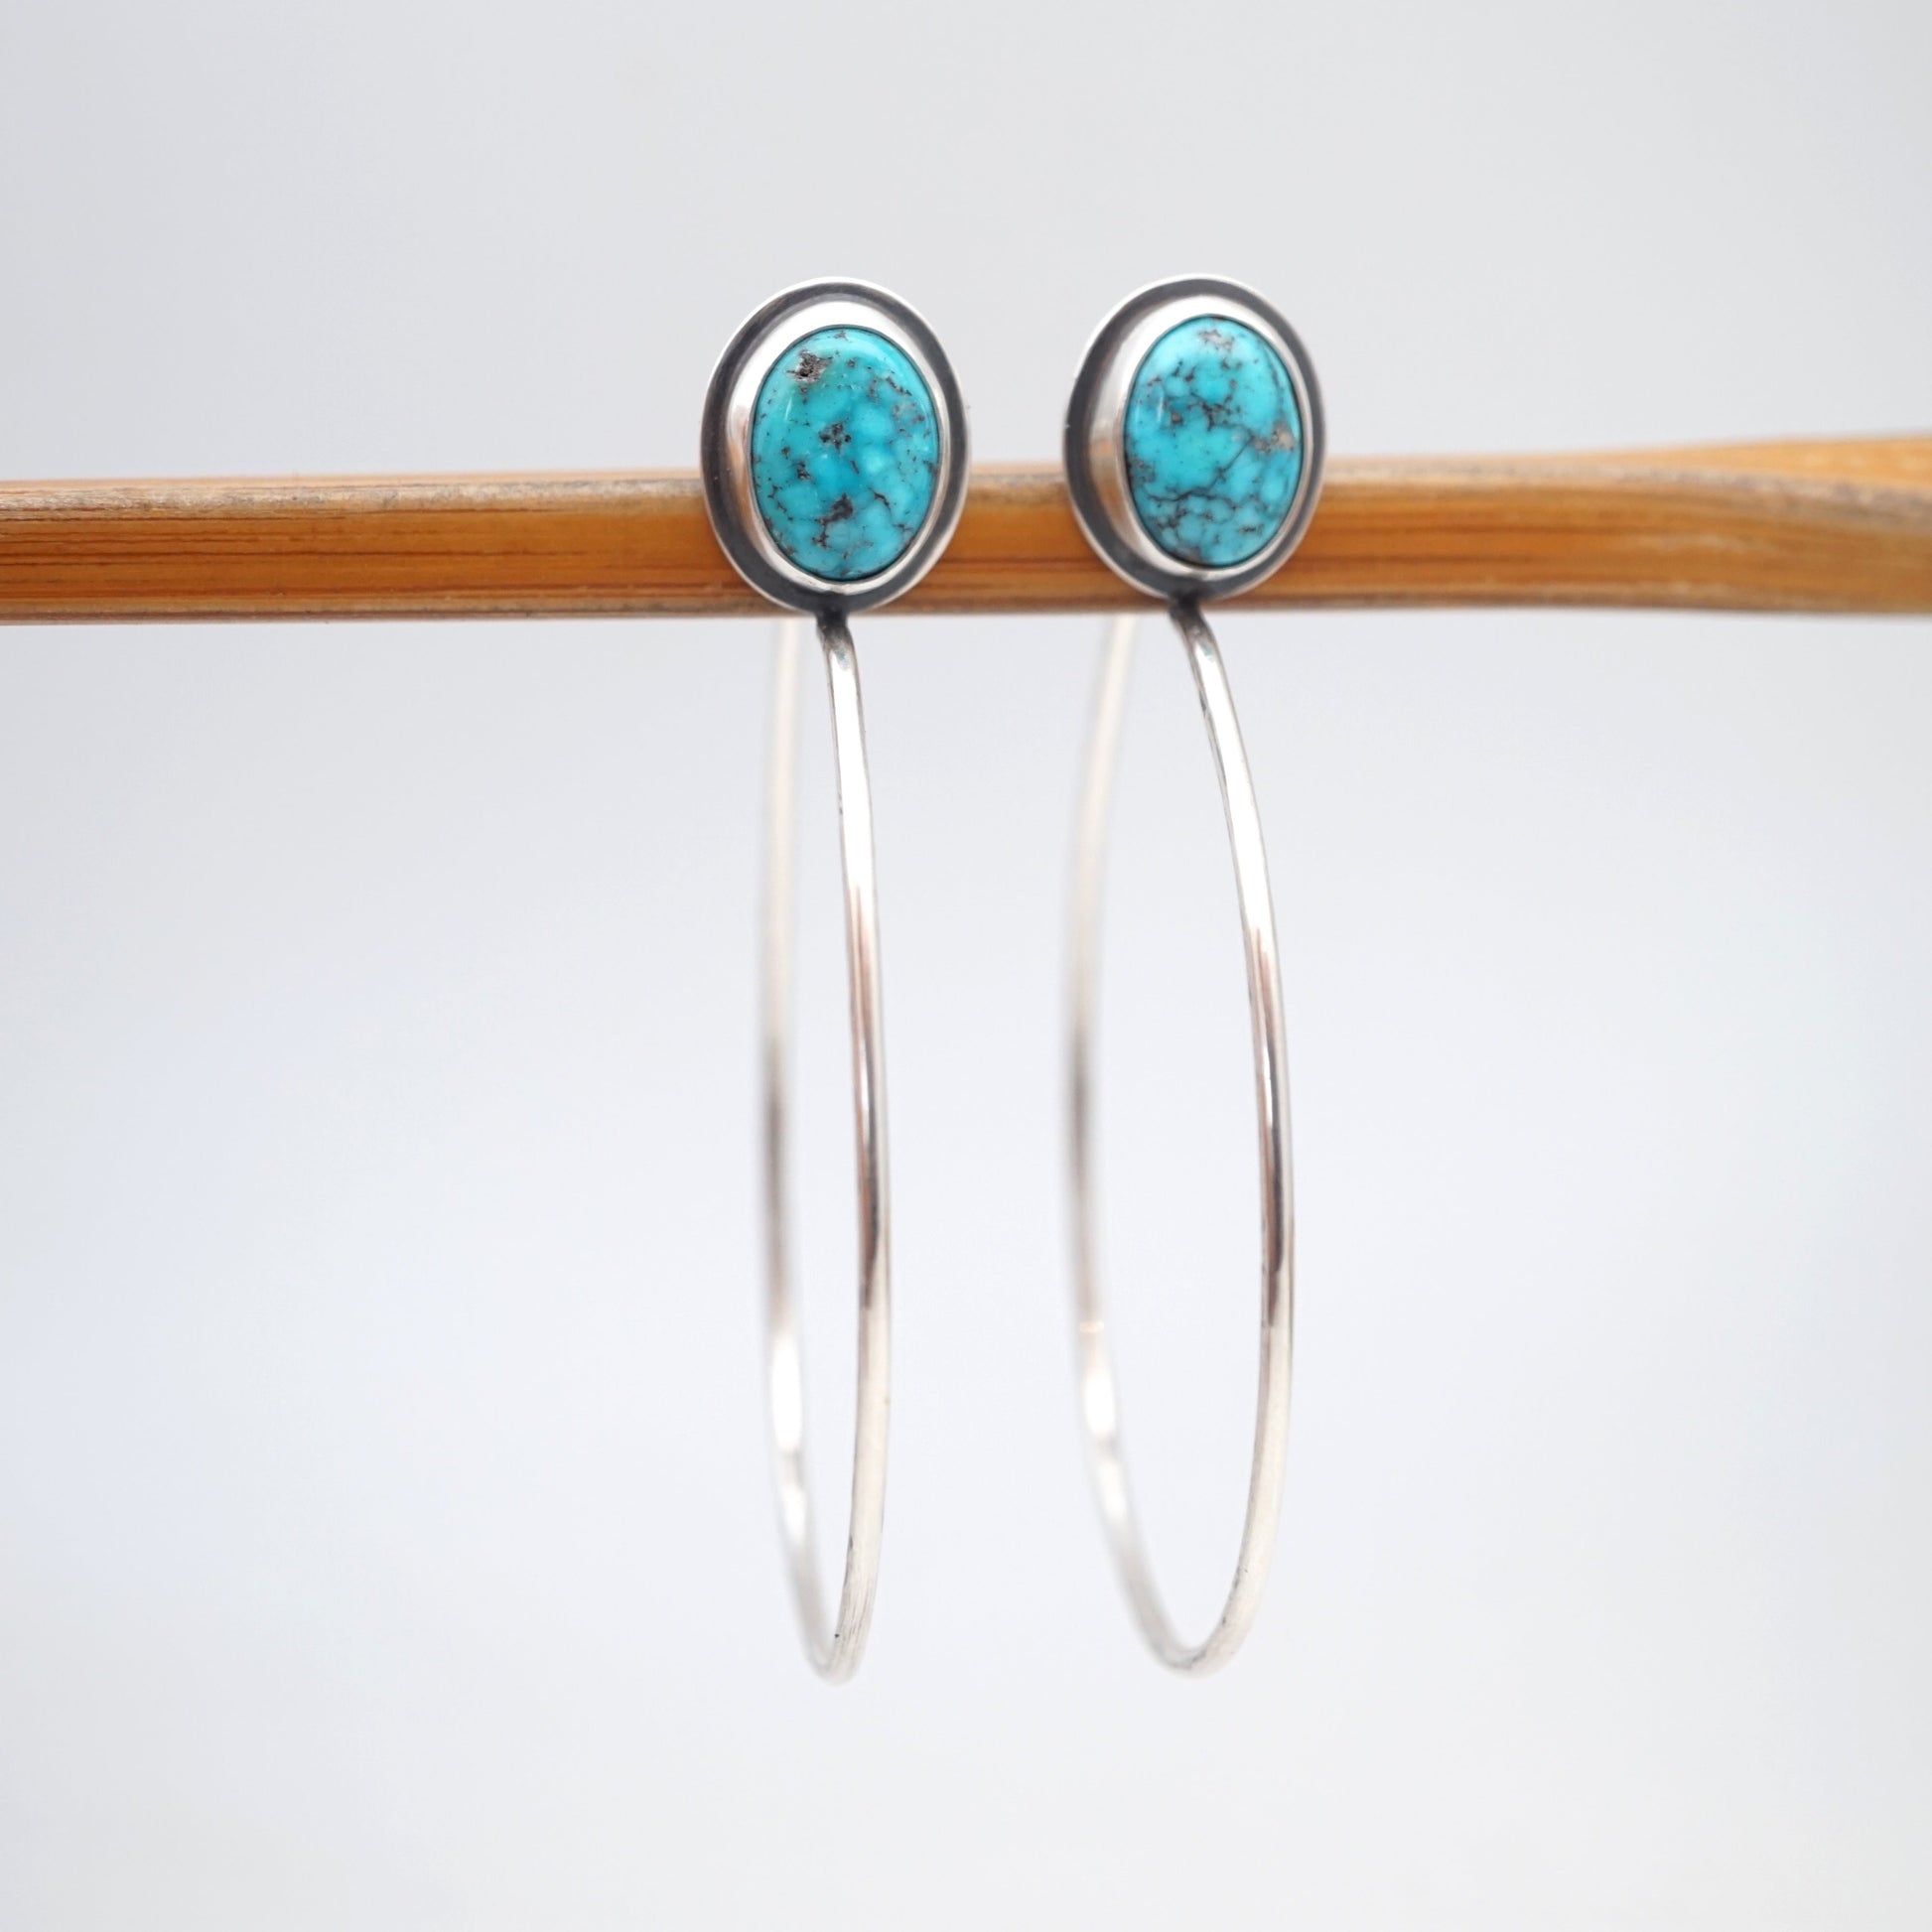 sonoran blue j turquoise + silver hoops - SMALL SIZE - Lumenrose